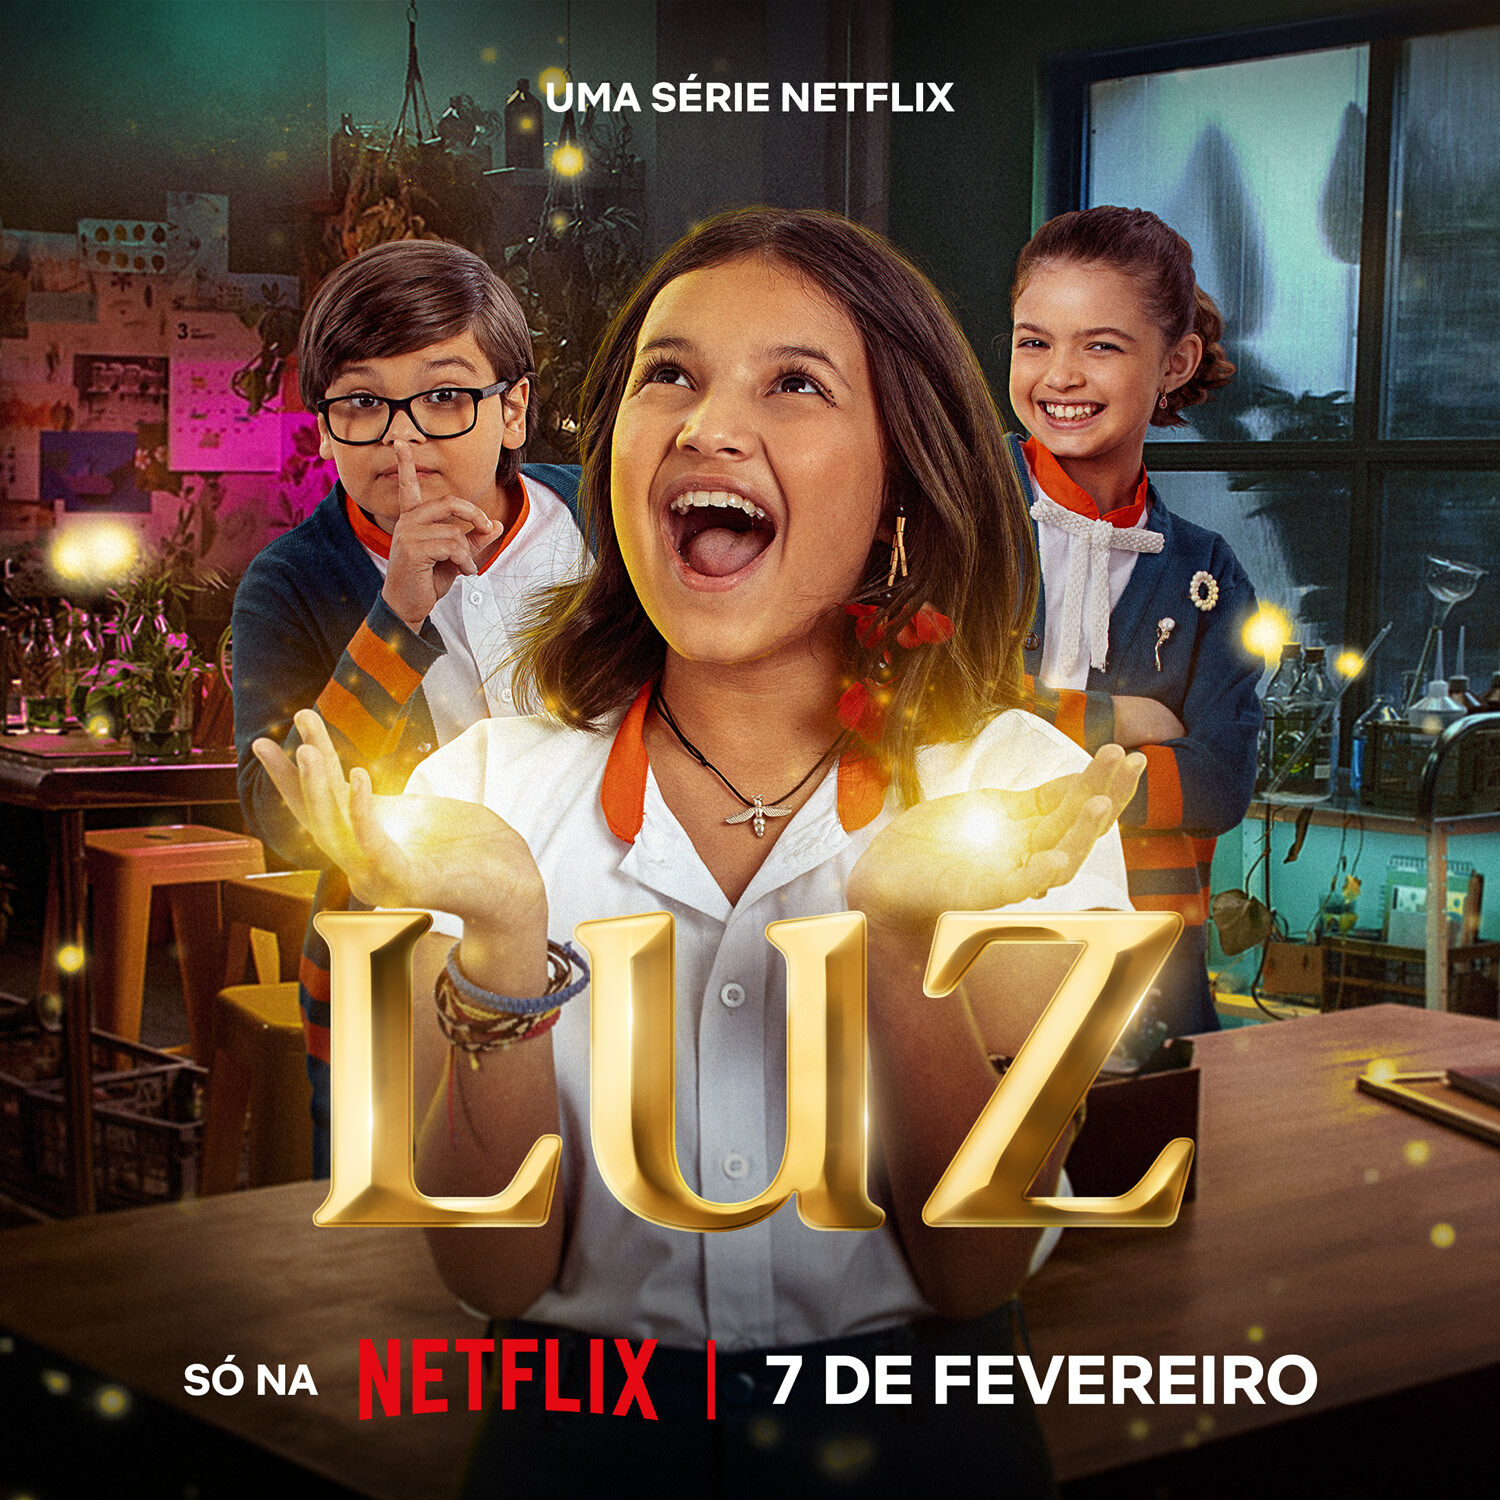 Luz: The Light Of The Heart